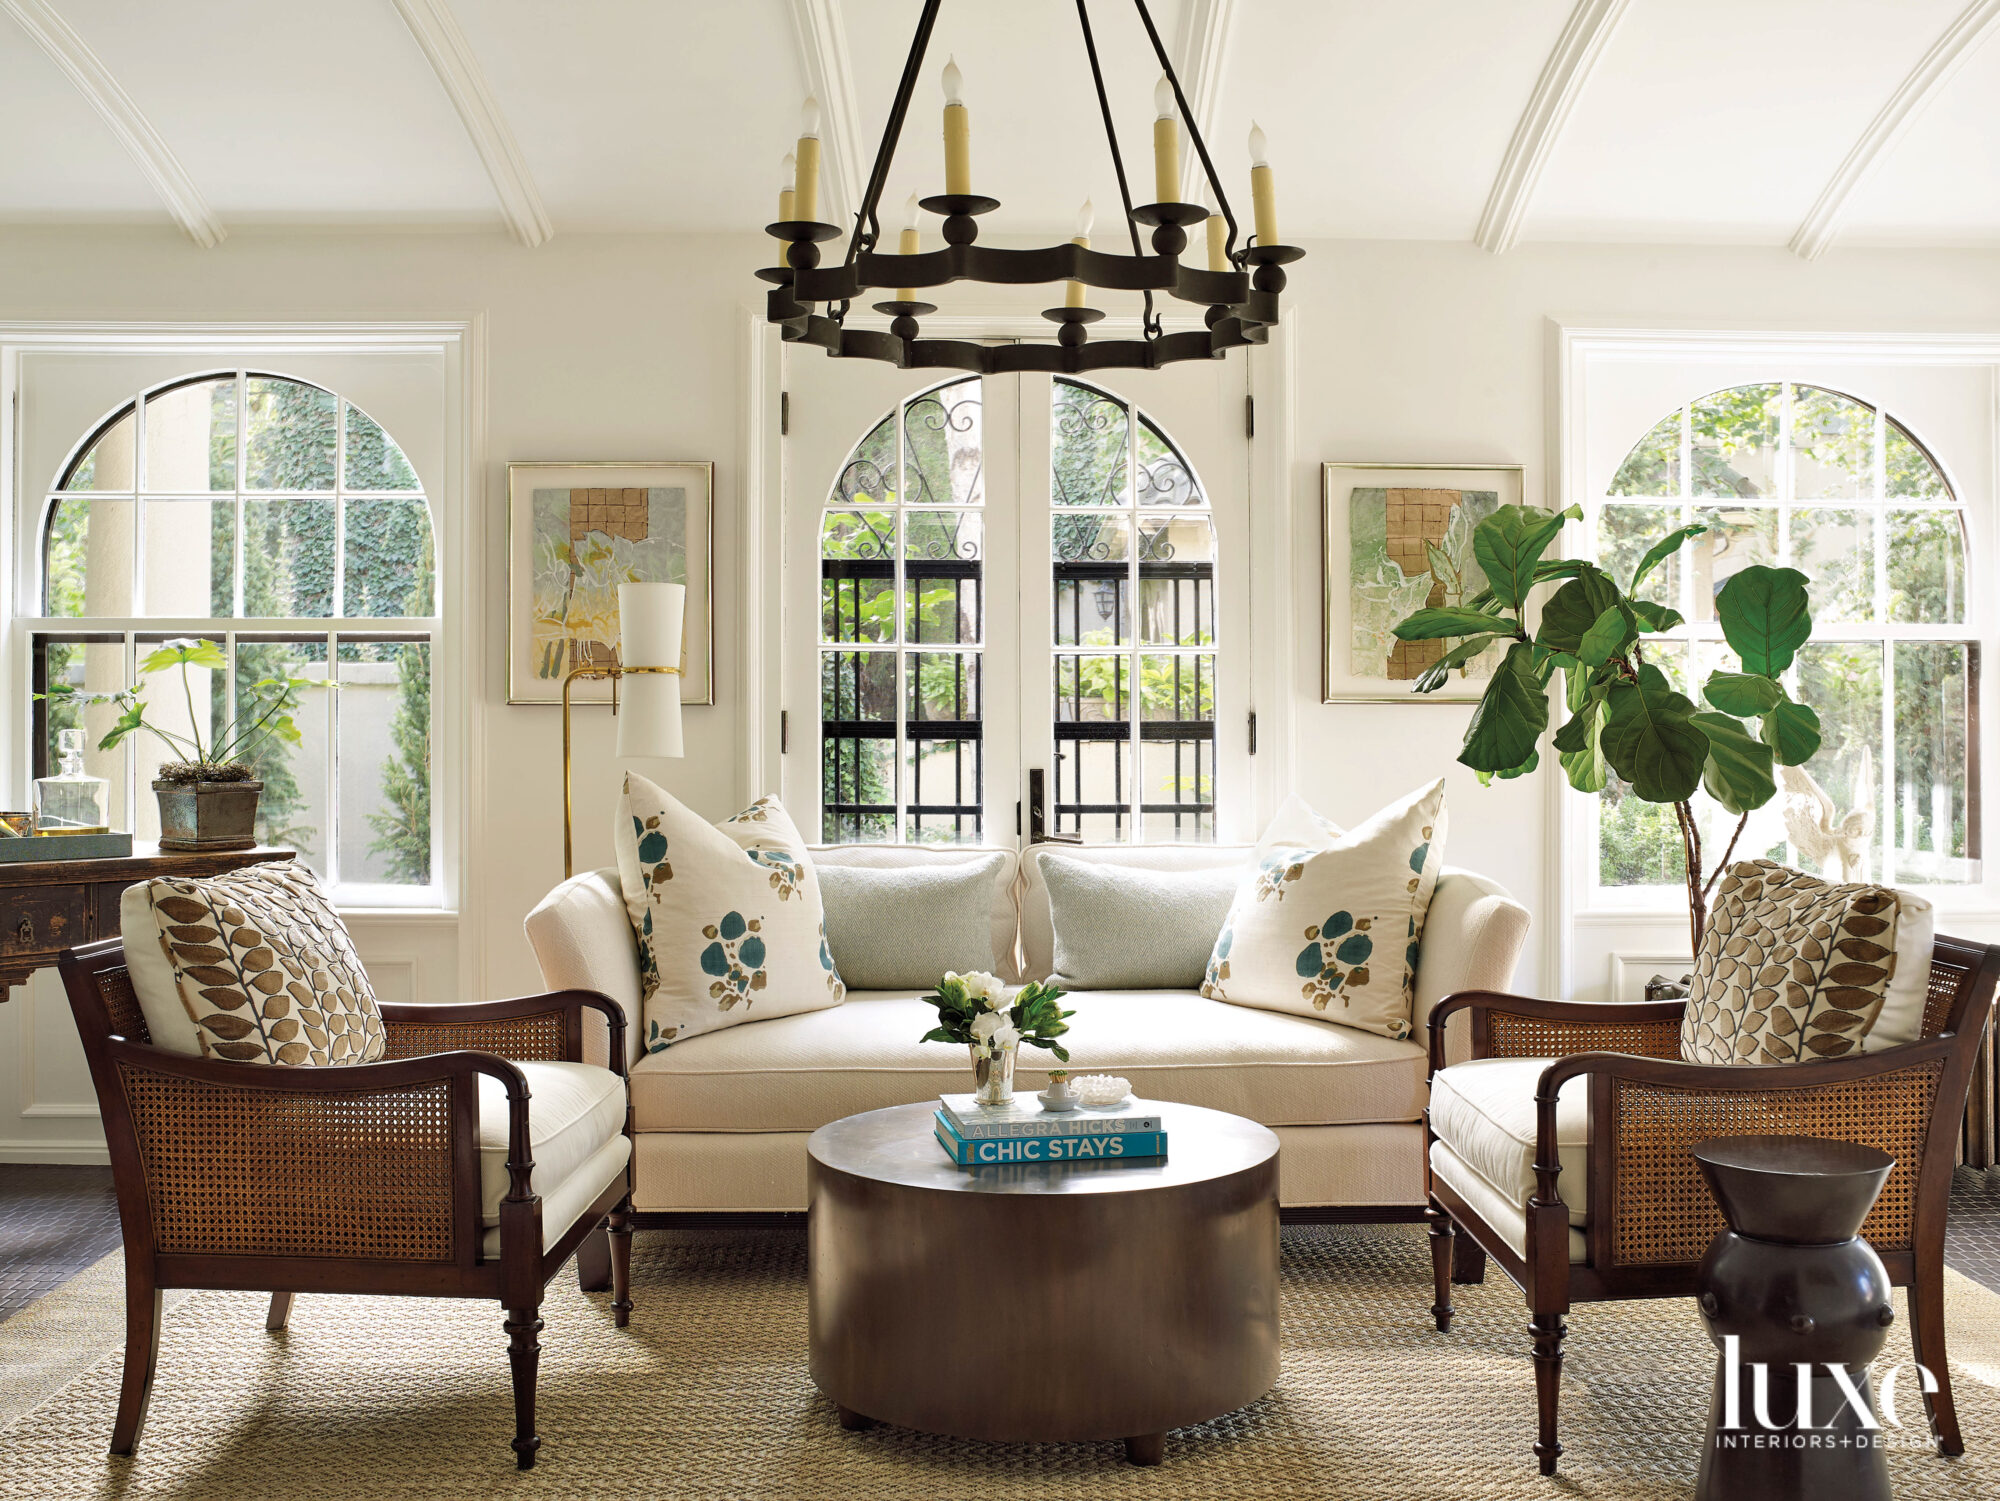 A sunroom has large arched...